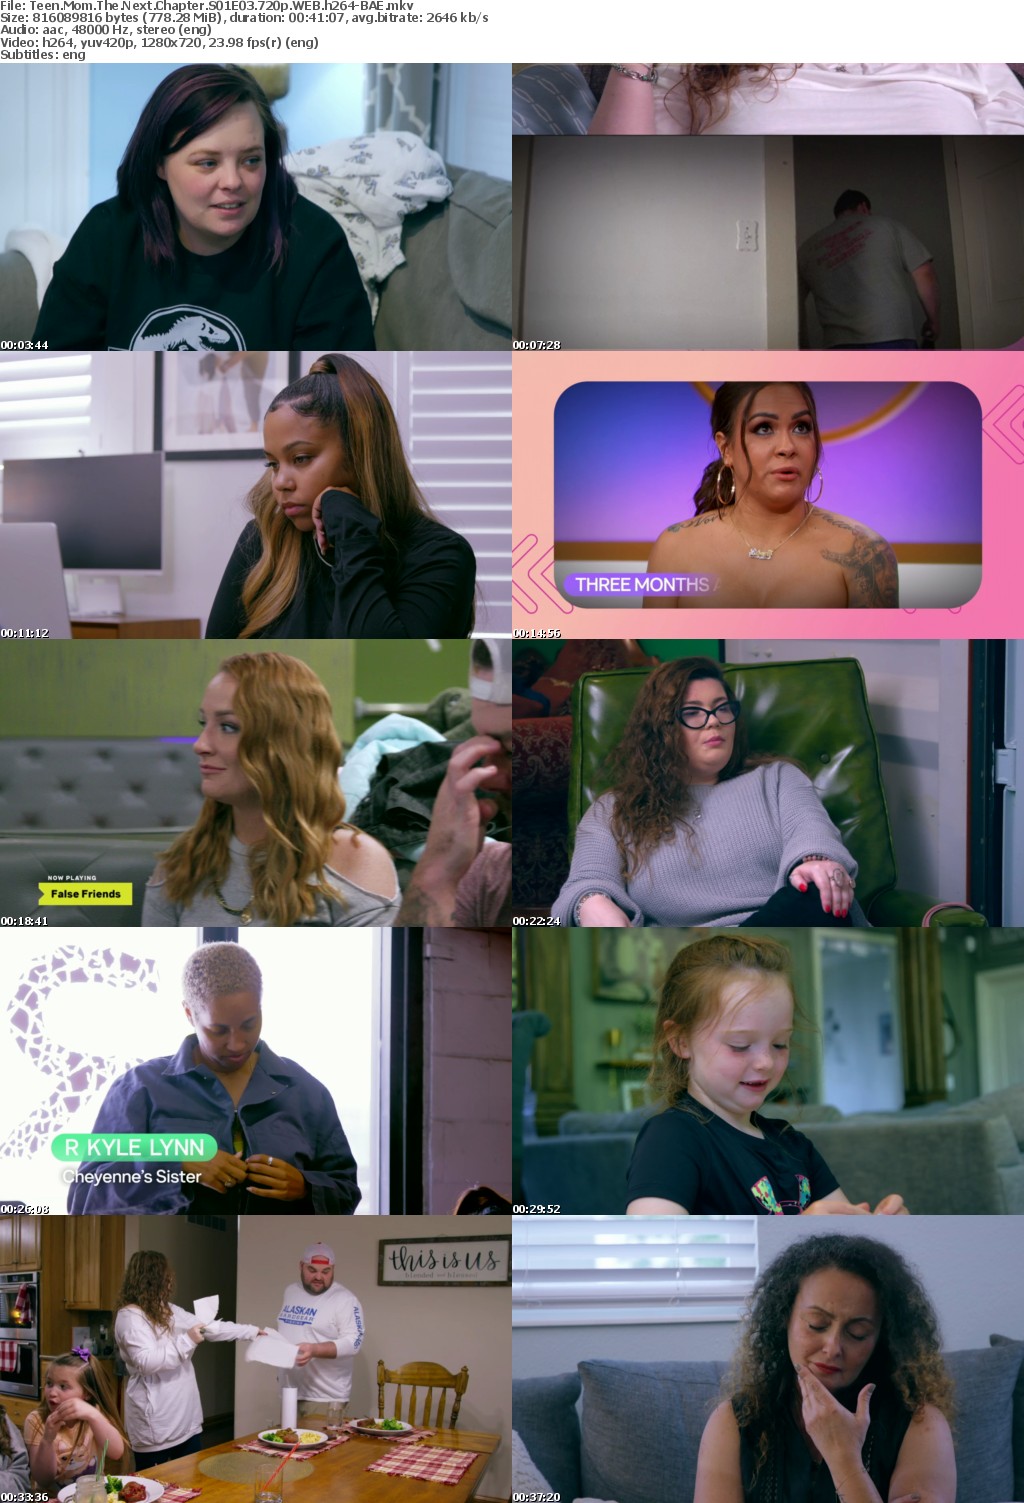 Teen Mom The Next Chapter S01E03 720p WEB h264-BAE